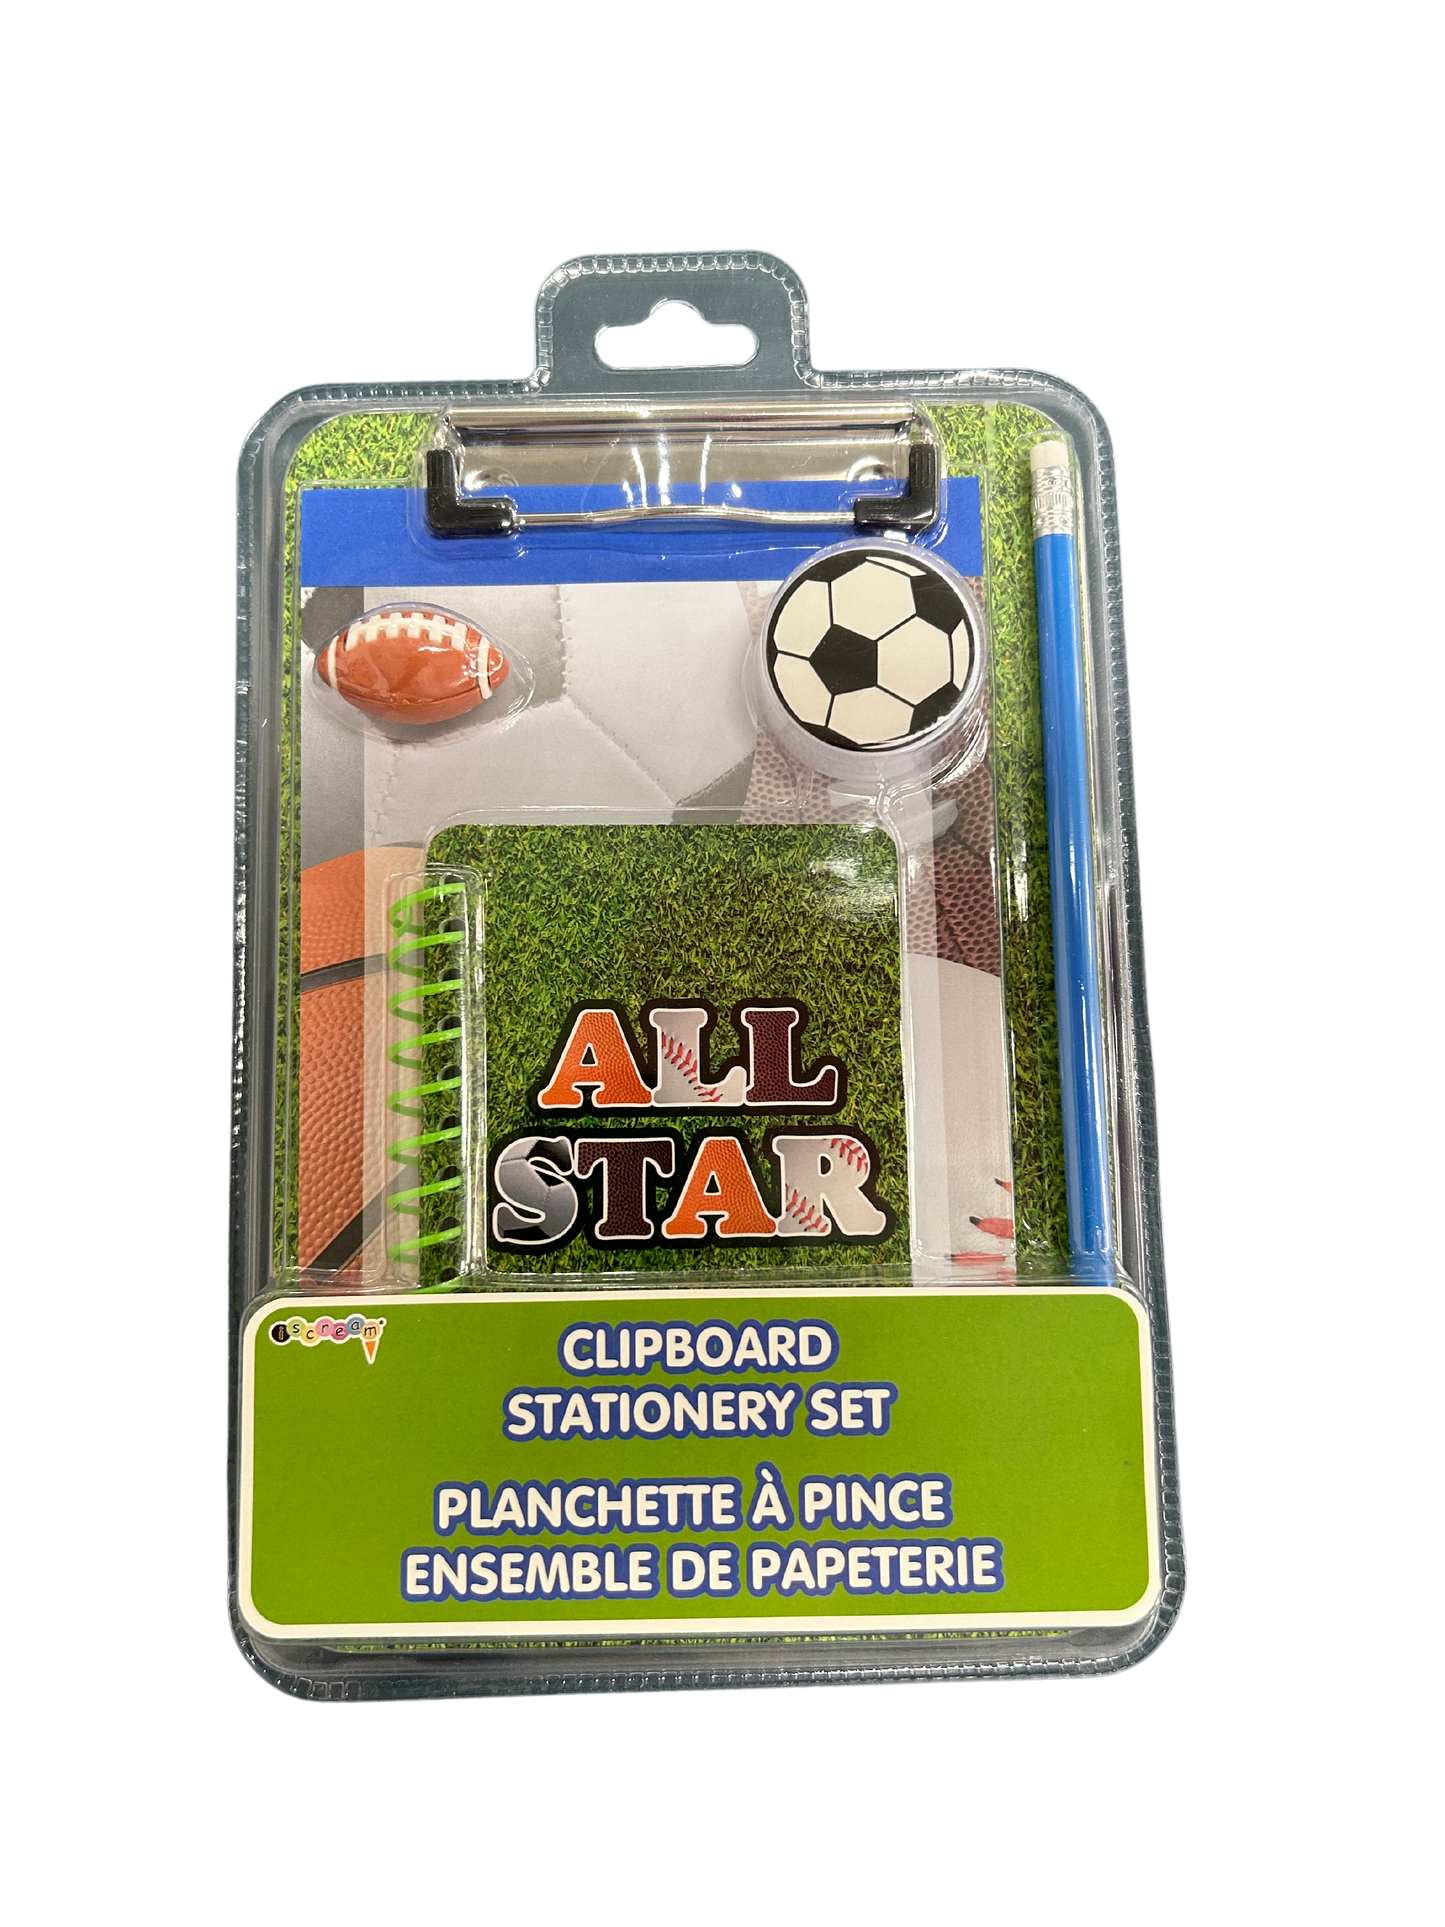 All Star Toy Clipboard Stationary Set